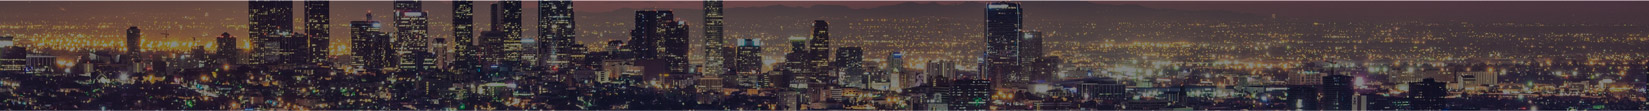 Banner of Los Angeles at Night- Thomas Neches CPA Expert Witness Graphic